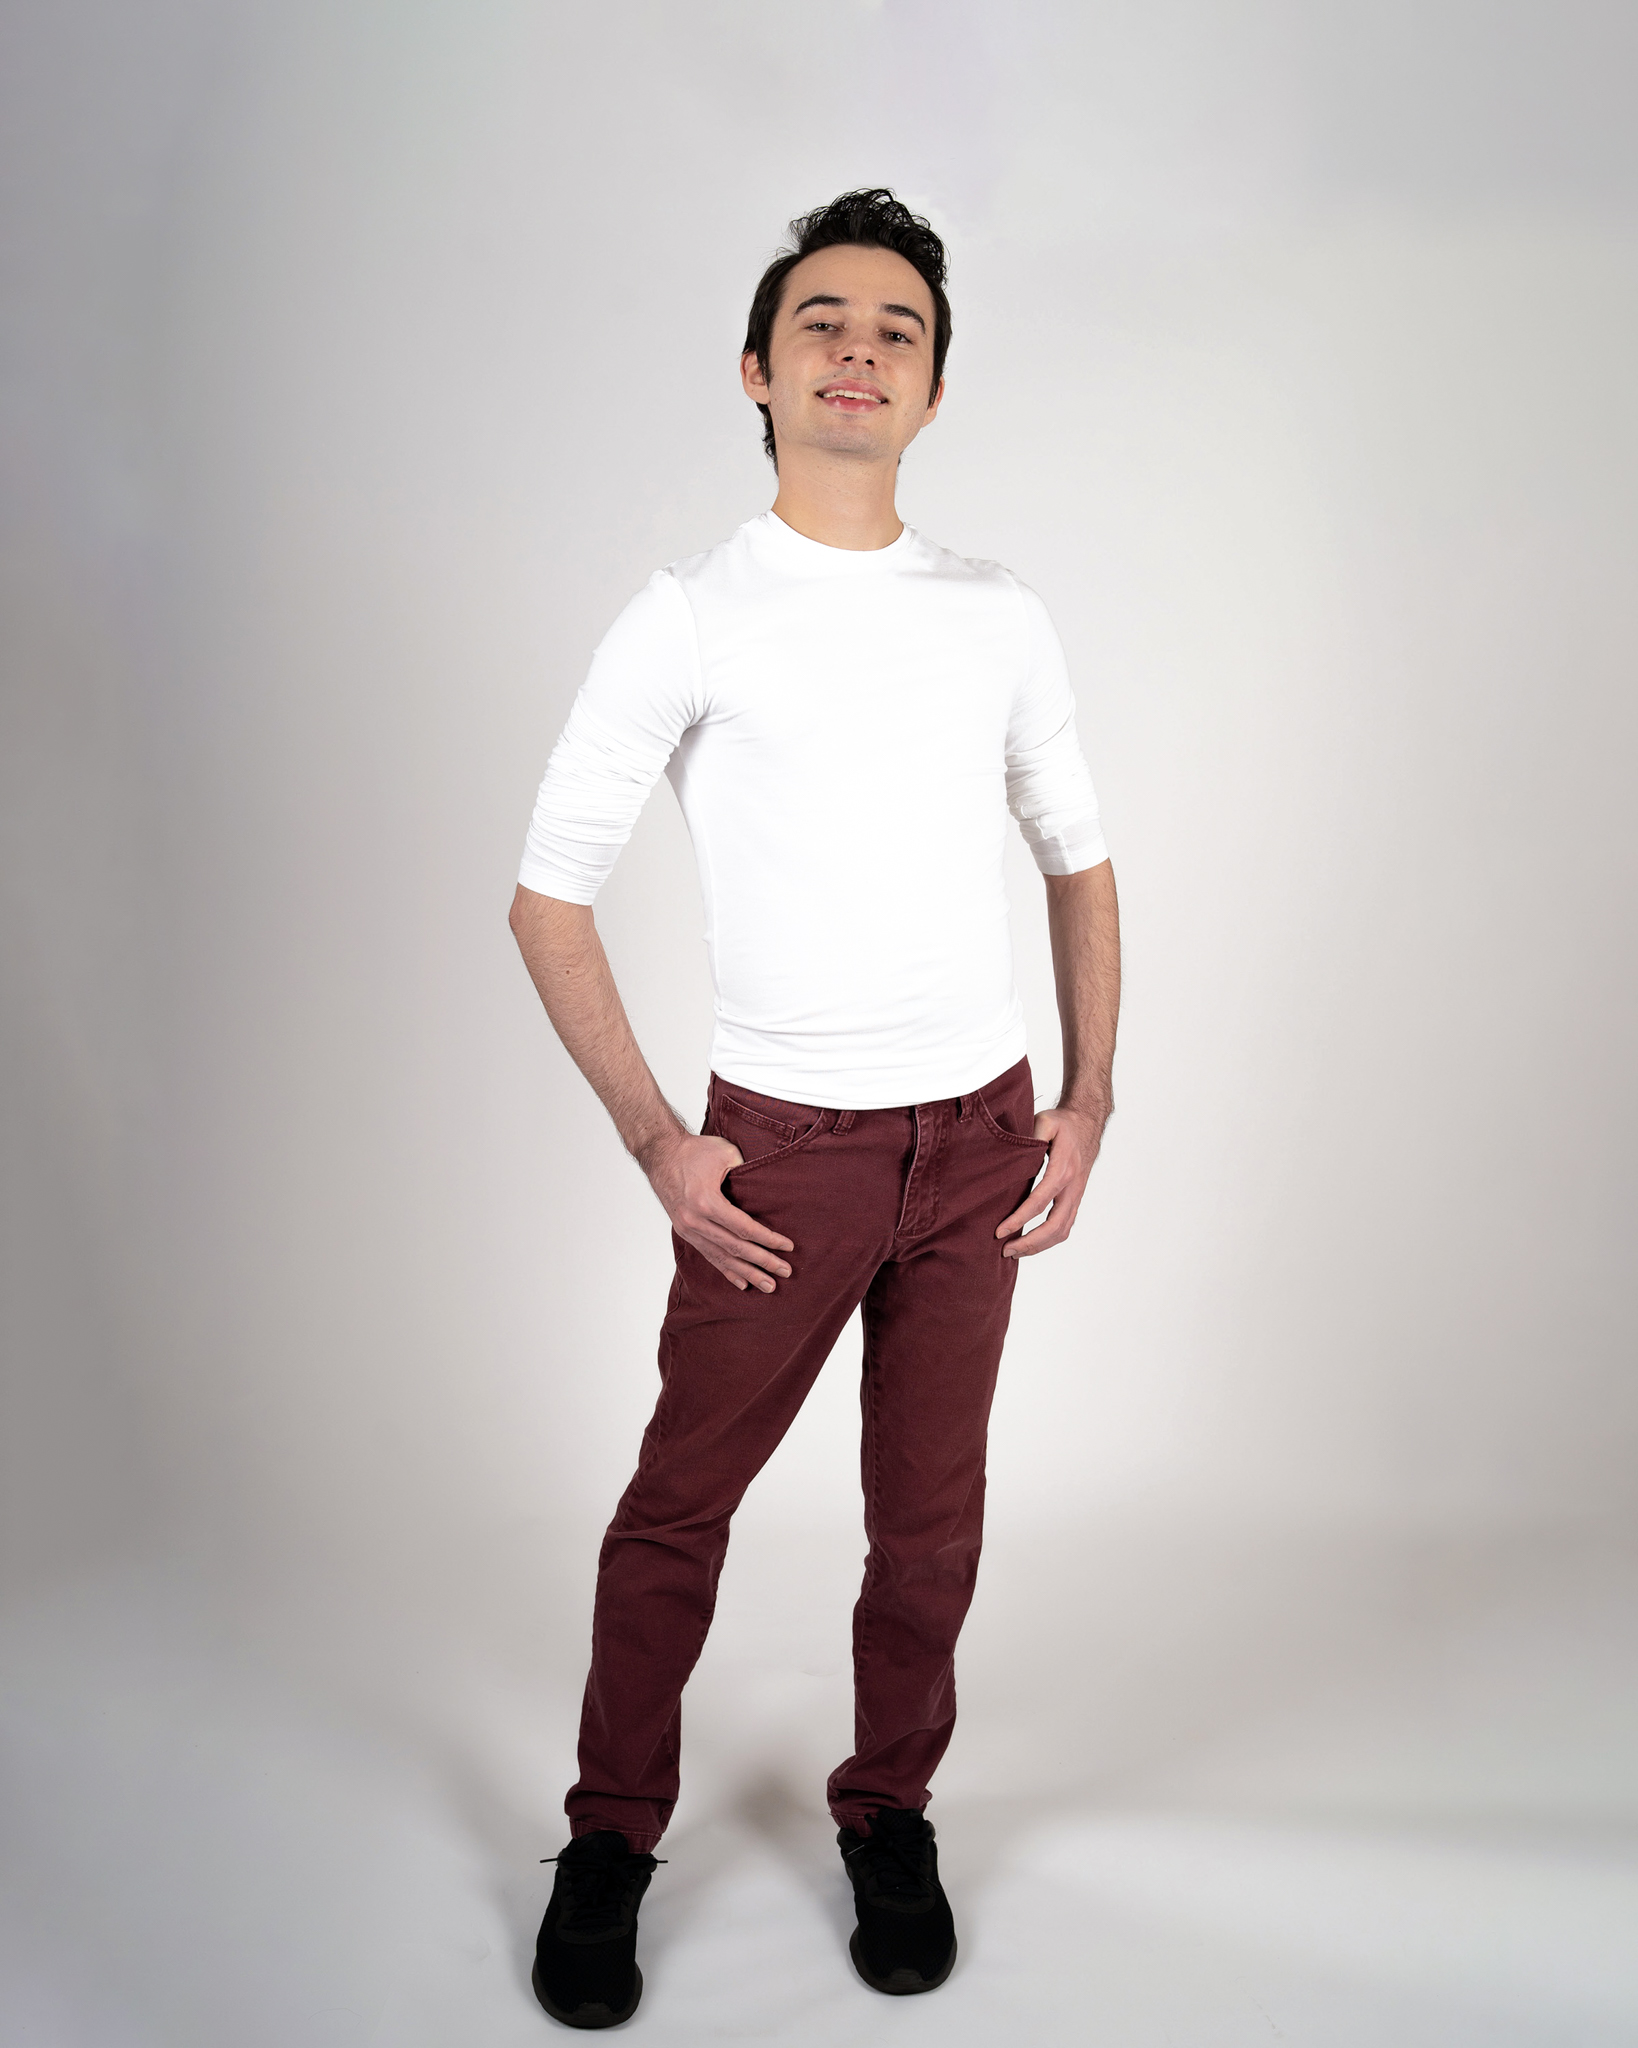 Alejandro Gonzalez, Man, posing smiling with head tilted upwards looking at the camera, in long-sleeve white shirt with rolled up sleeves, with maroon pants and black sneakers. 